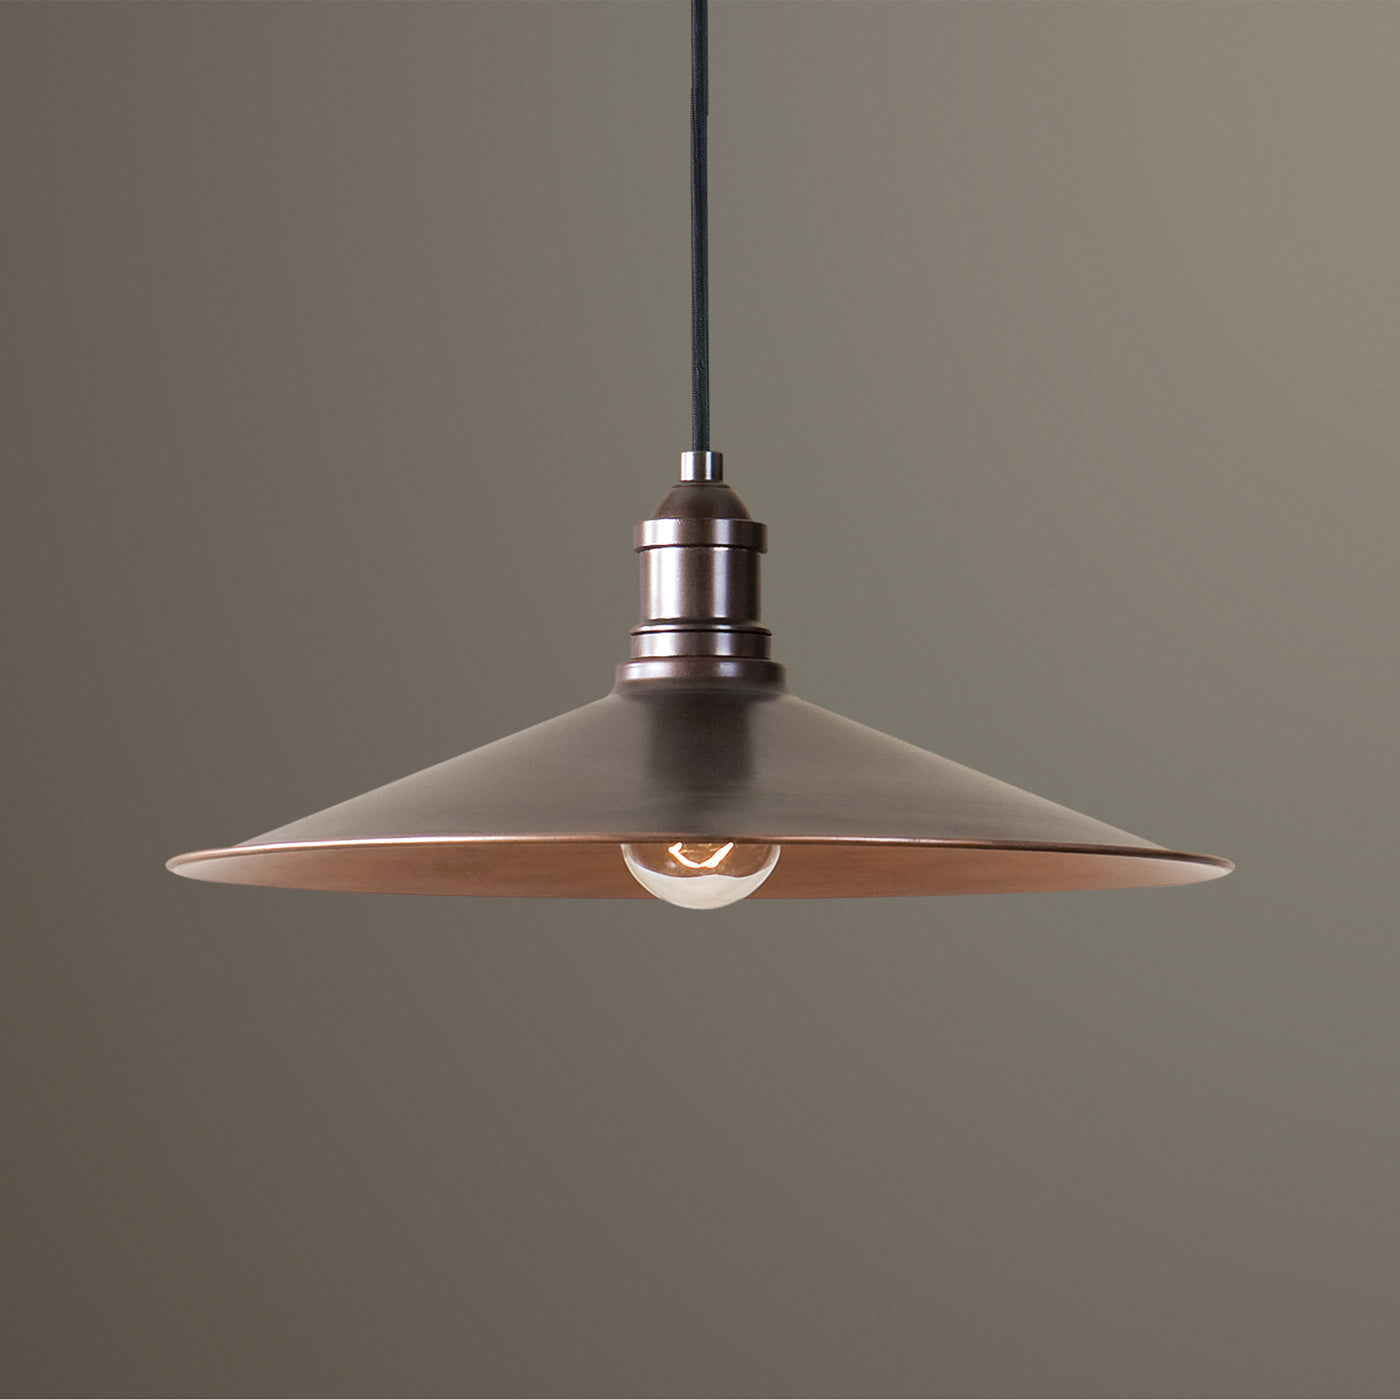 The Antique Copper Finish Adds A Sleek Look To This Classic Pendant. Includes 15' Cord For Adjustable Installation.